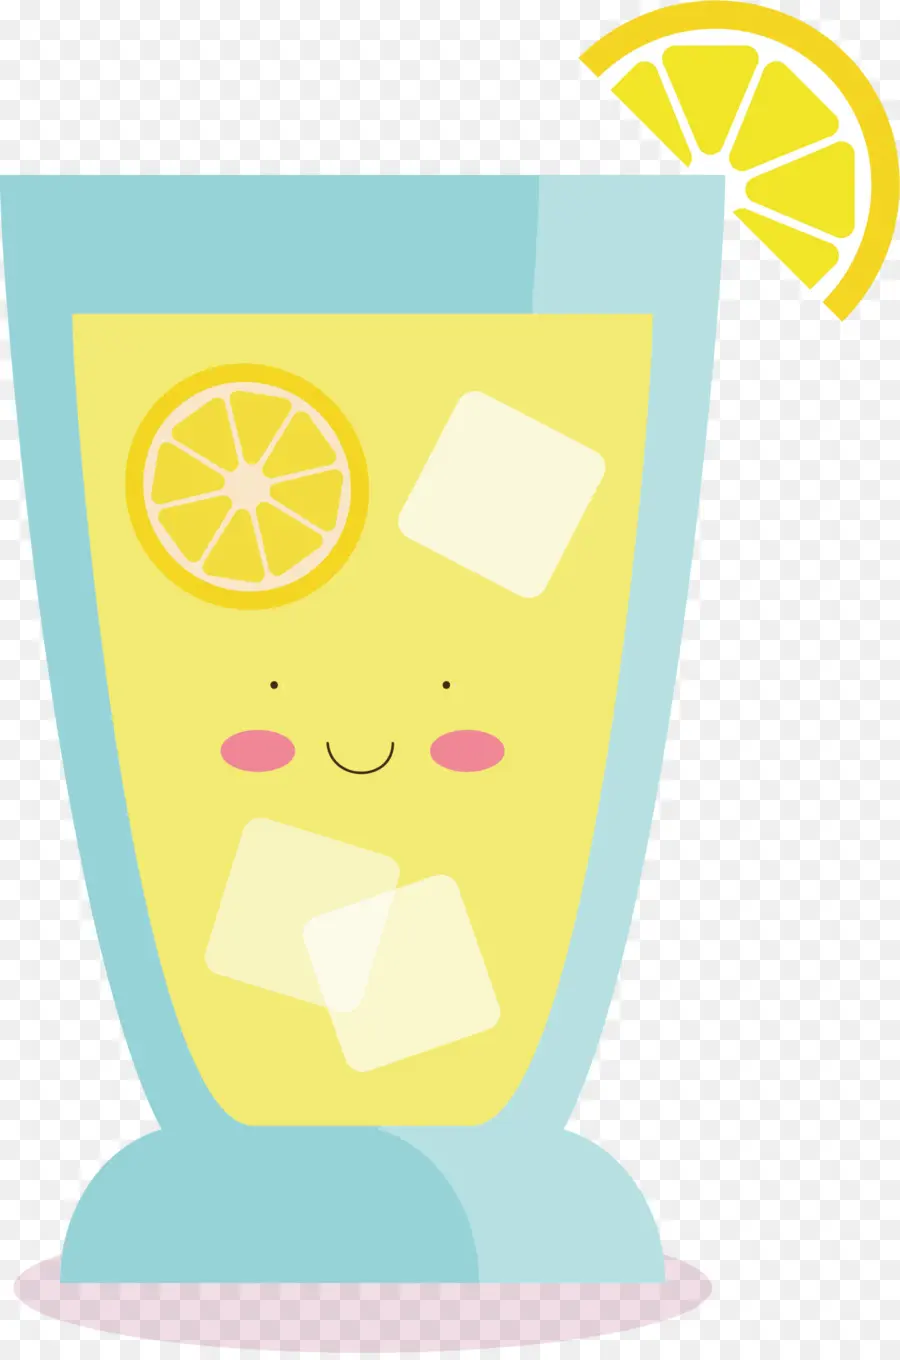 Jus，Limonade PNG